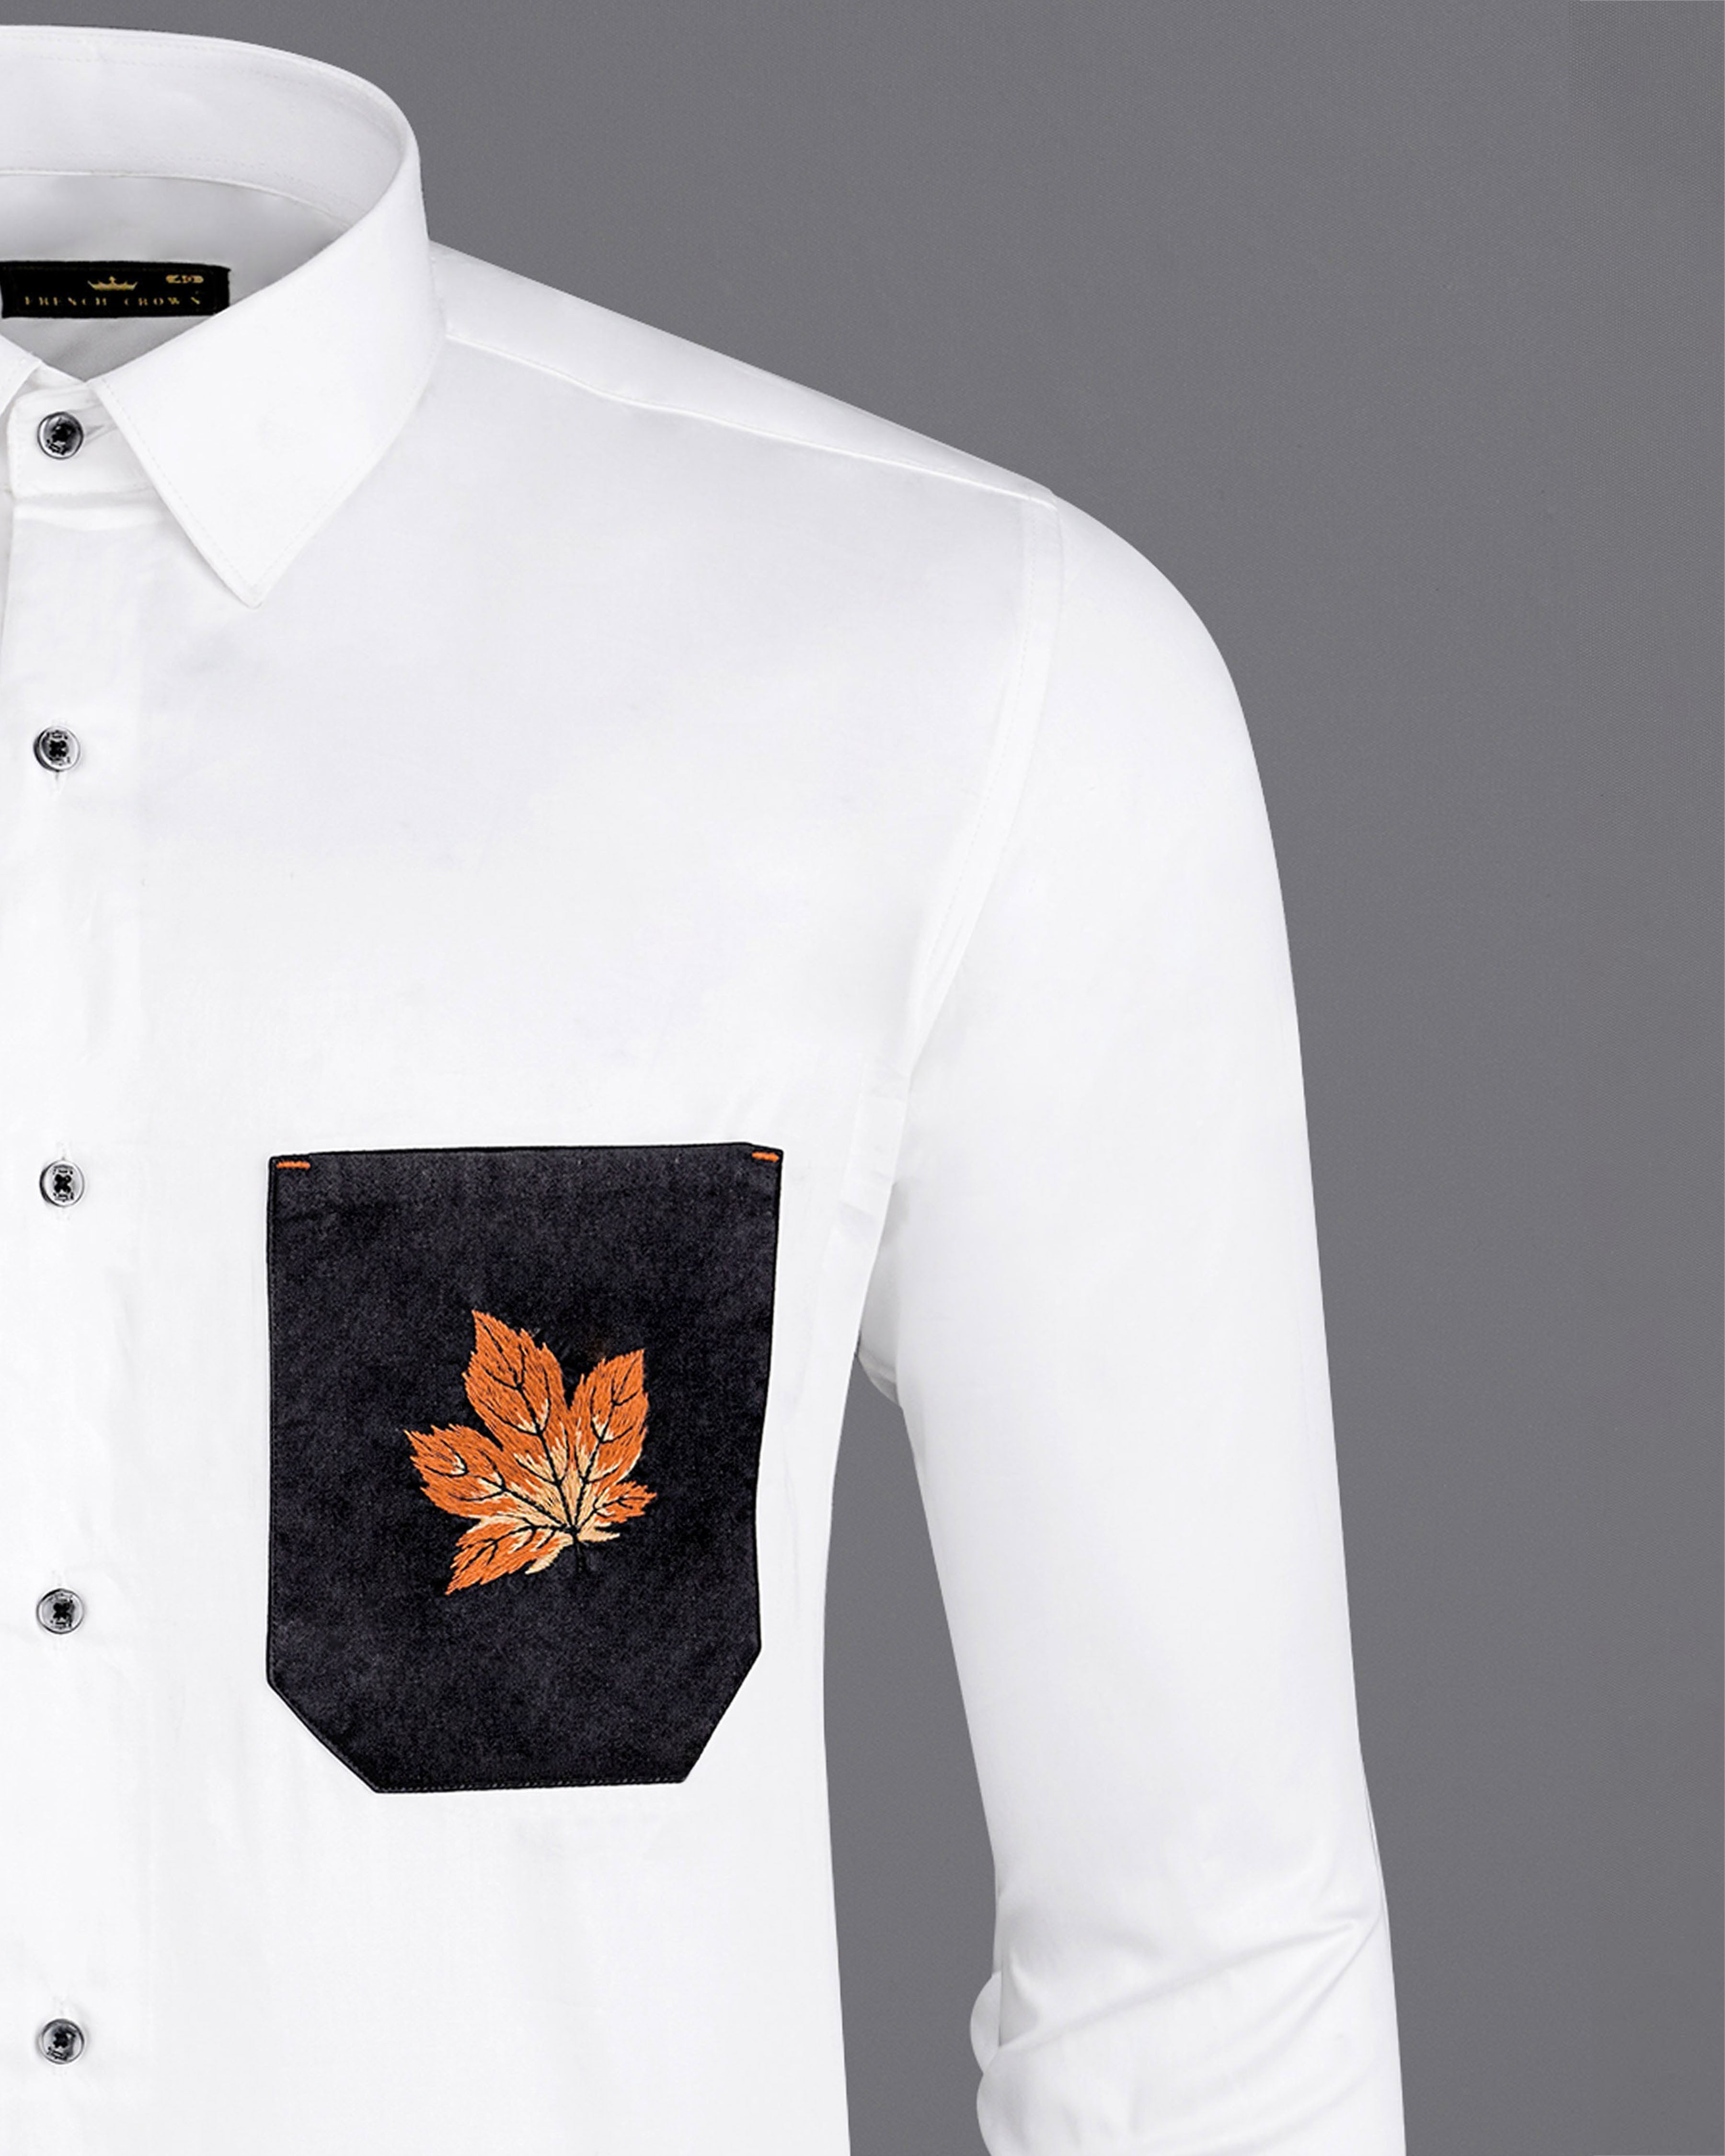 Bright White Subtle Sheen with Black Pocket and Leaves Embroidered Super Soft Premium Cotton Shirt 1062-BLK-P494-38,1062-BLK-P494-H-38,1062-BLK-P494-39,1062-BLK-P494-H-39,1062-BLK-P494-40,1062-BLK-P494-H-40,1062-BLK-P494-42,1062-BLK-P494-H-42,1062-BLK-P494-44,1062-BLK-P494-H-44,1062-BLK-P494-46,1062-BLK-P494-H-46,1062-BLK-P494-48,1062-BLK-P494-H-48,1062-BLK-P494-50,1062-BLK-P494-H-50,1062-BLK-P494-52,1062-BLK-P494-H-52